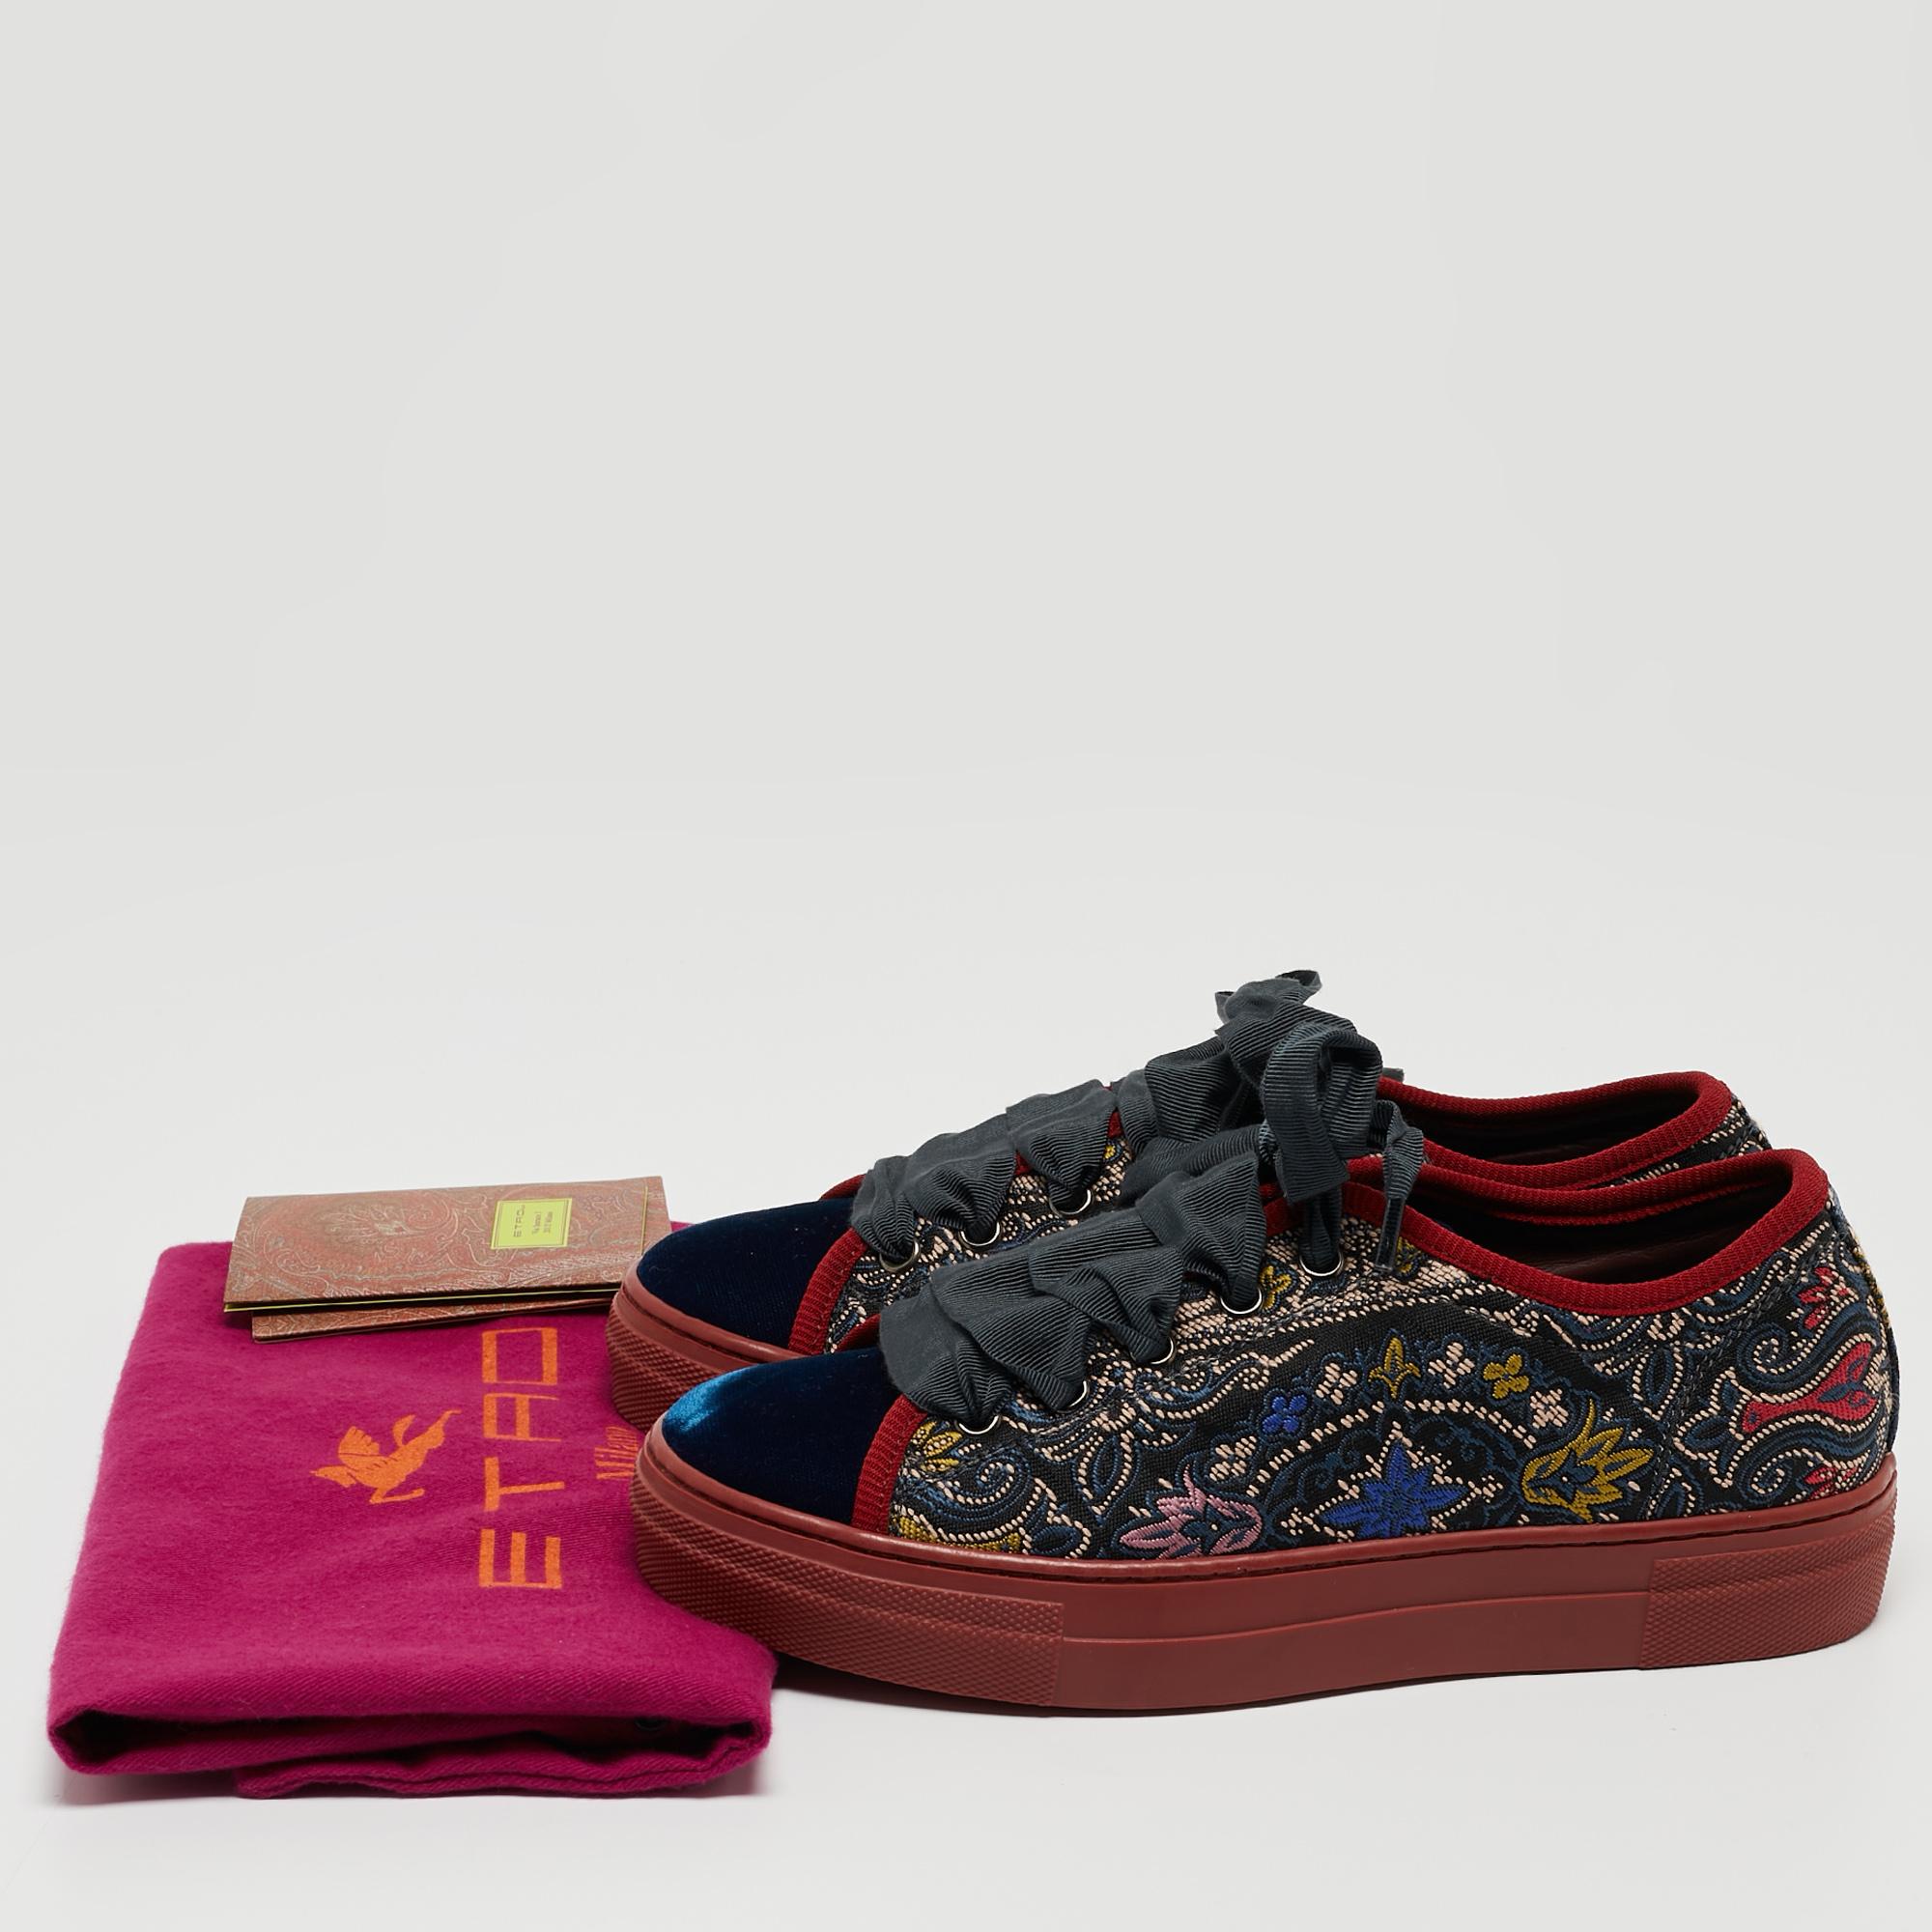 Etro Multicolor Embroidered Fabric and Velvet Low Top Sneakers Size 36 5